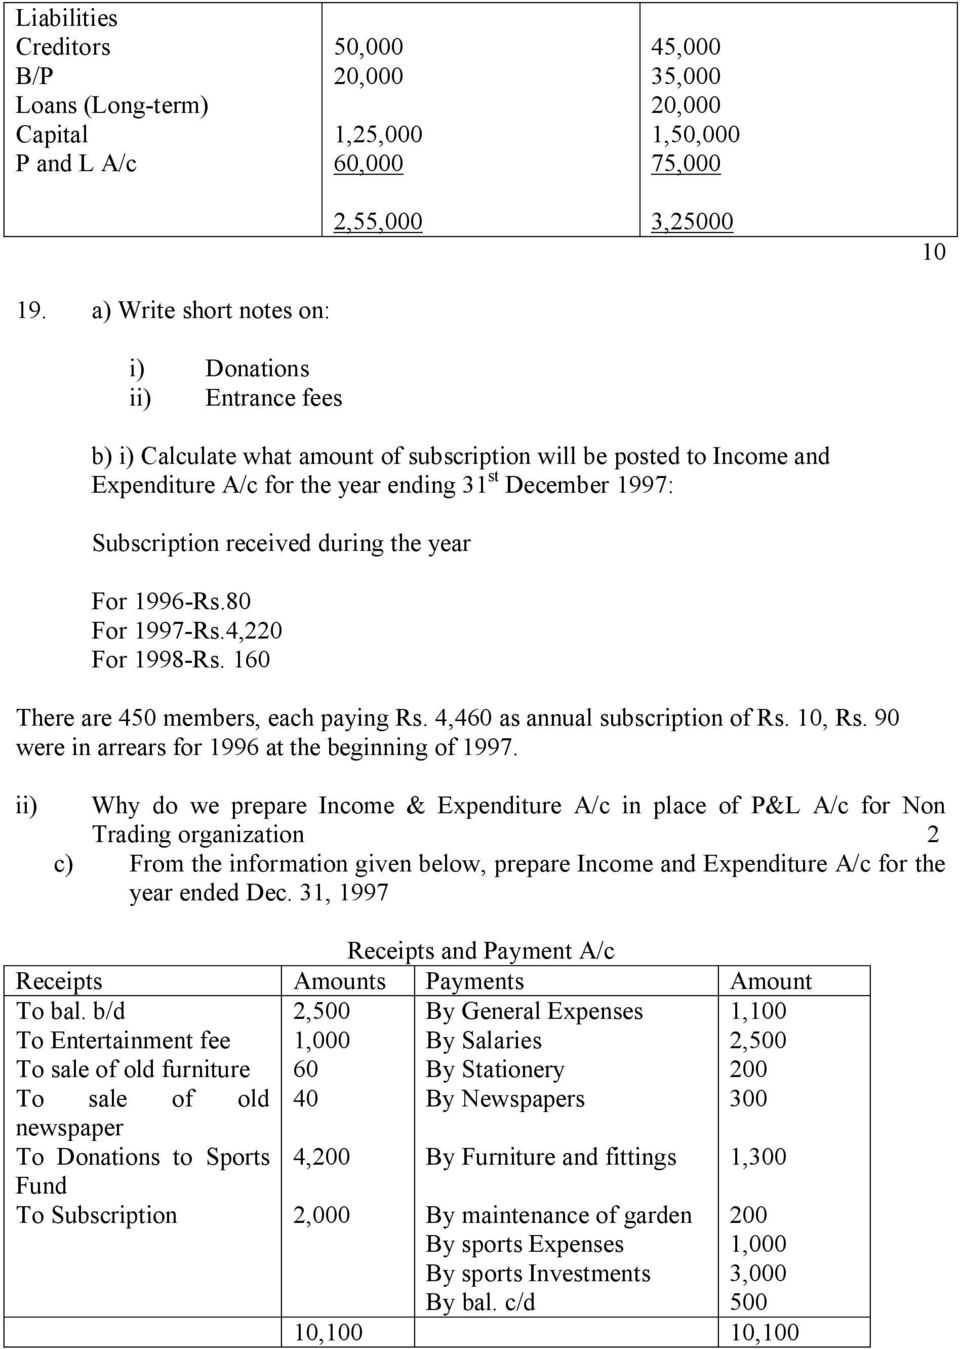 received during the year For 1996-Rs.80 For 1997-Rs.4,220 For 1998-Rs. 160 There are 450 members, each paying Rs. 4,460 as annual subscription of Rs. 10, Rs.